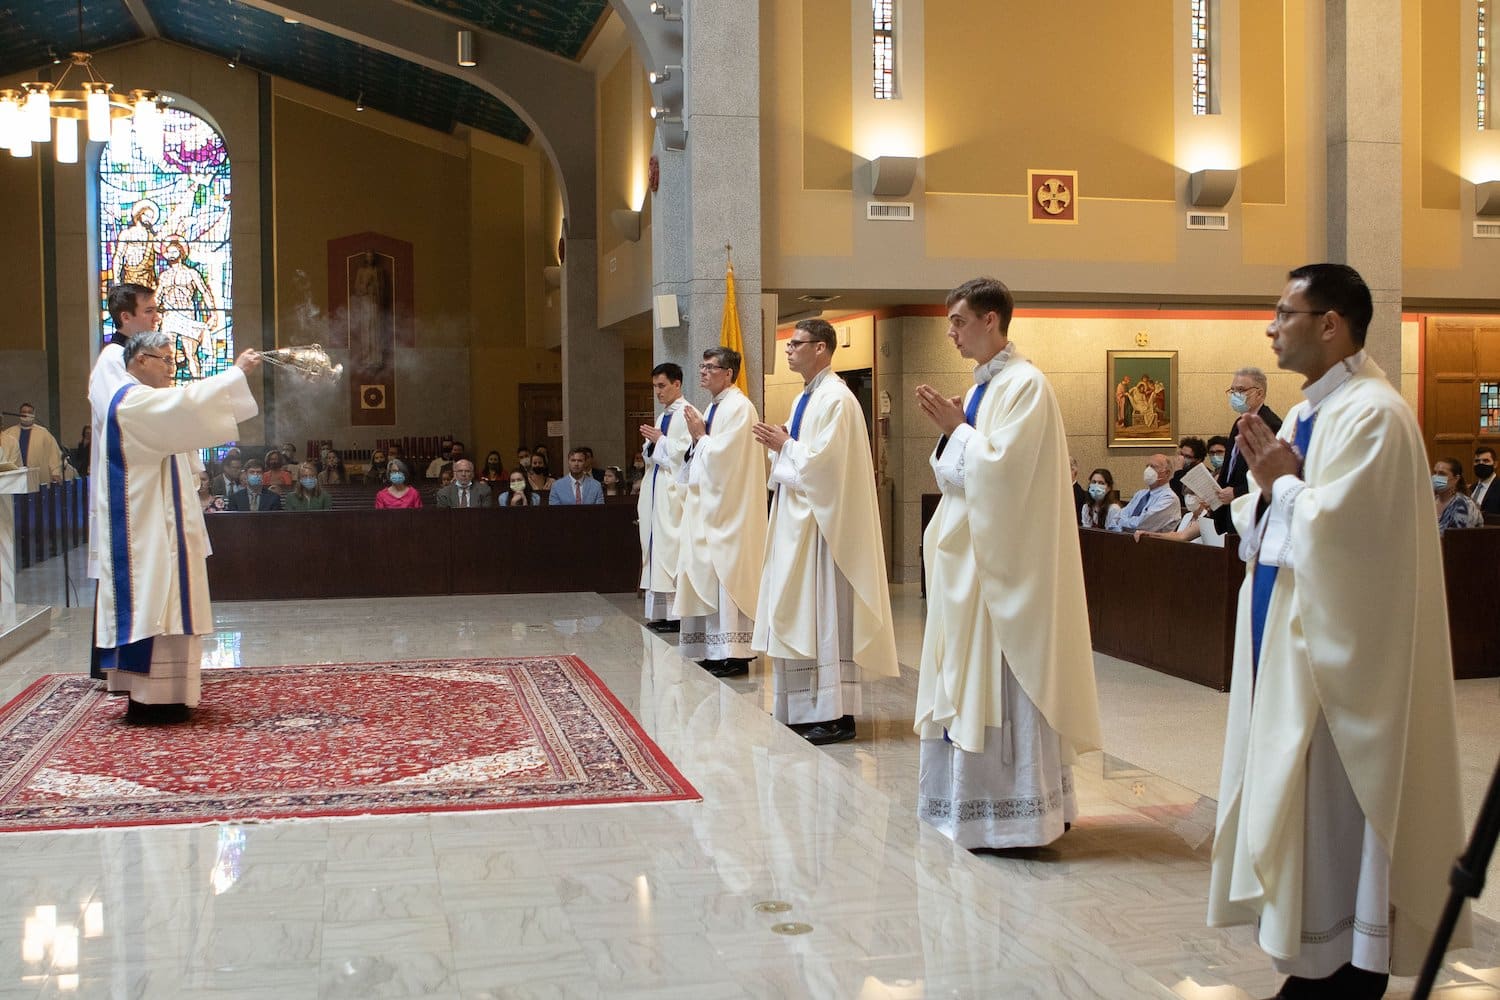 Deacon Vincent Cong Nguyen, assisted by Father Joseph W. Farrell, parochial vicar of St. Timothy Church in Chantilly, Va., uses incense to bless five newly ordained priests at the Cathedral of St. Thomas More in Arlington, Va.